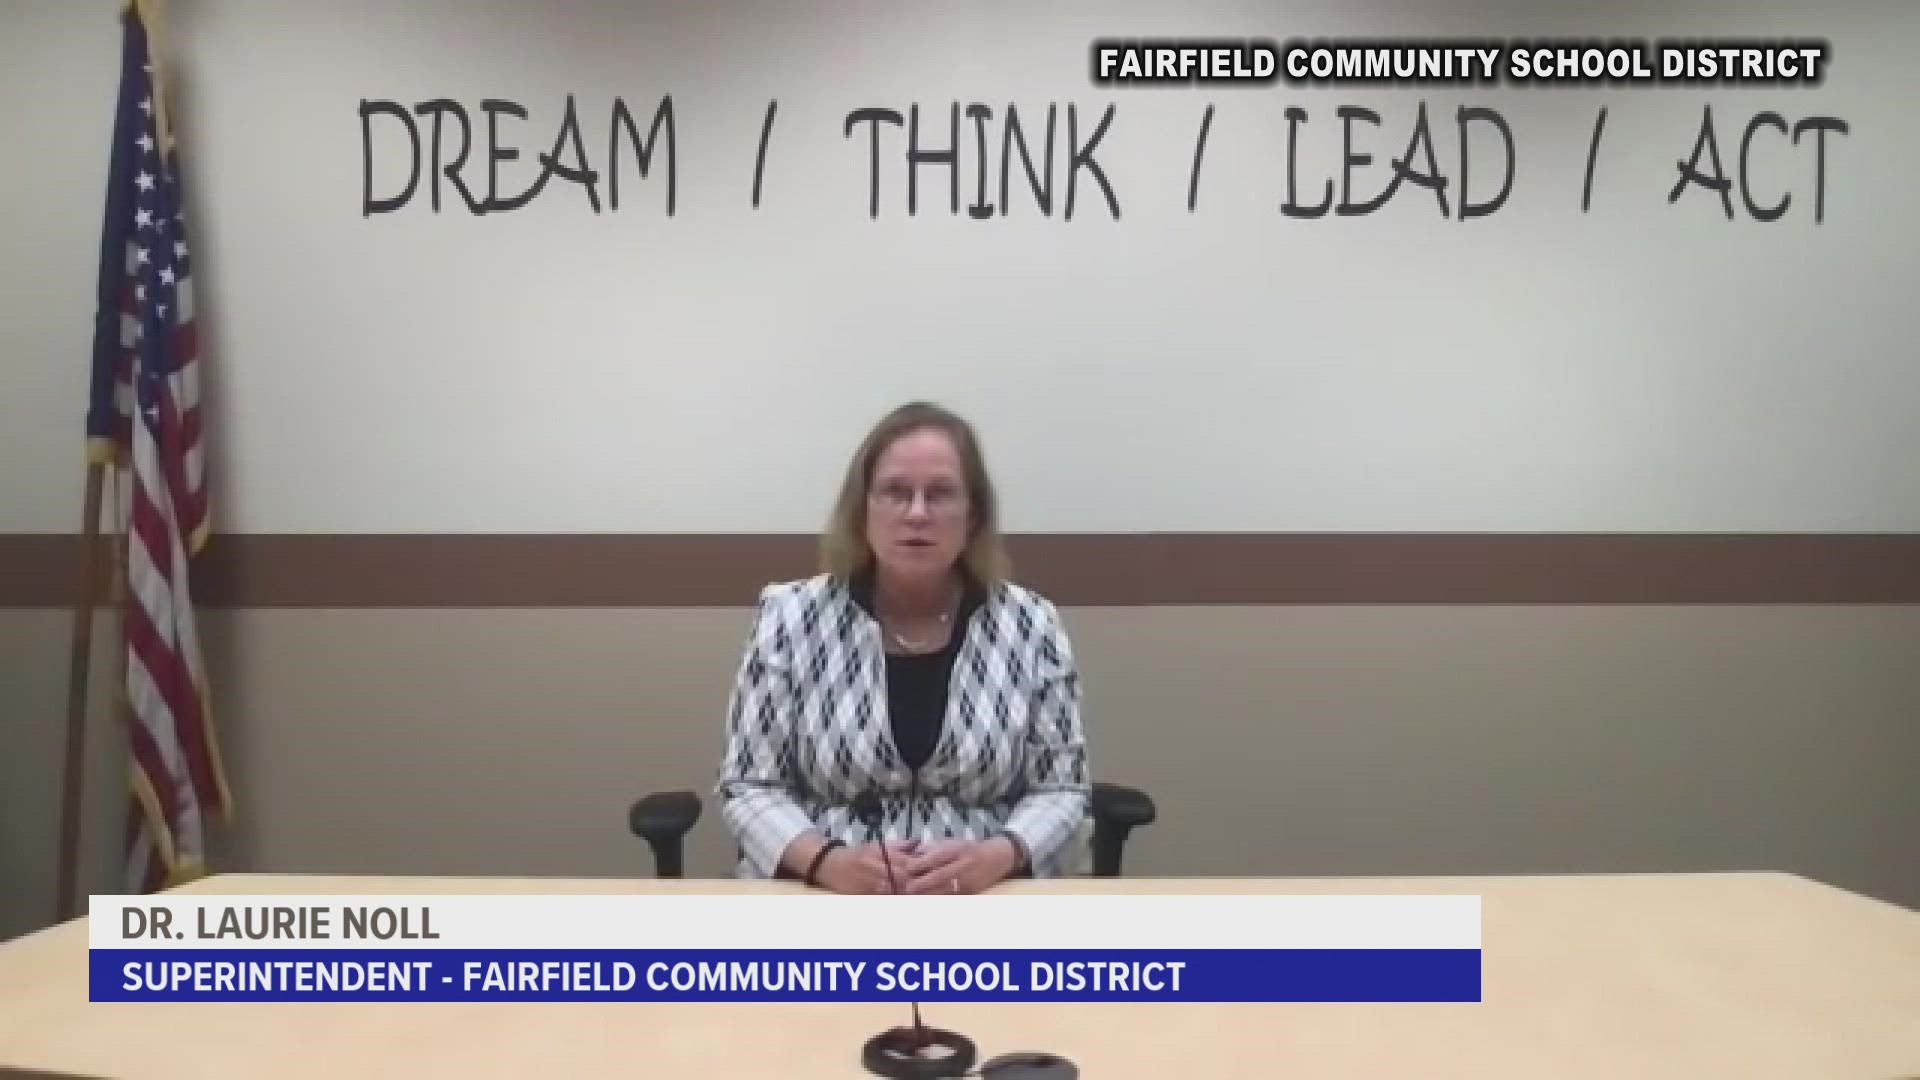 Two 16-year-olds, Willard Miller and Jeremy Goodale have been charged with murder in the death of Fairfield High School teacher Nohema Graber.